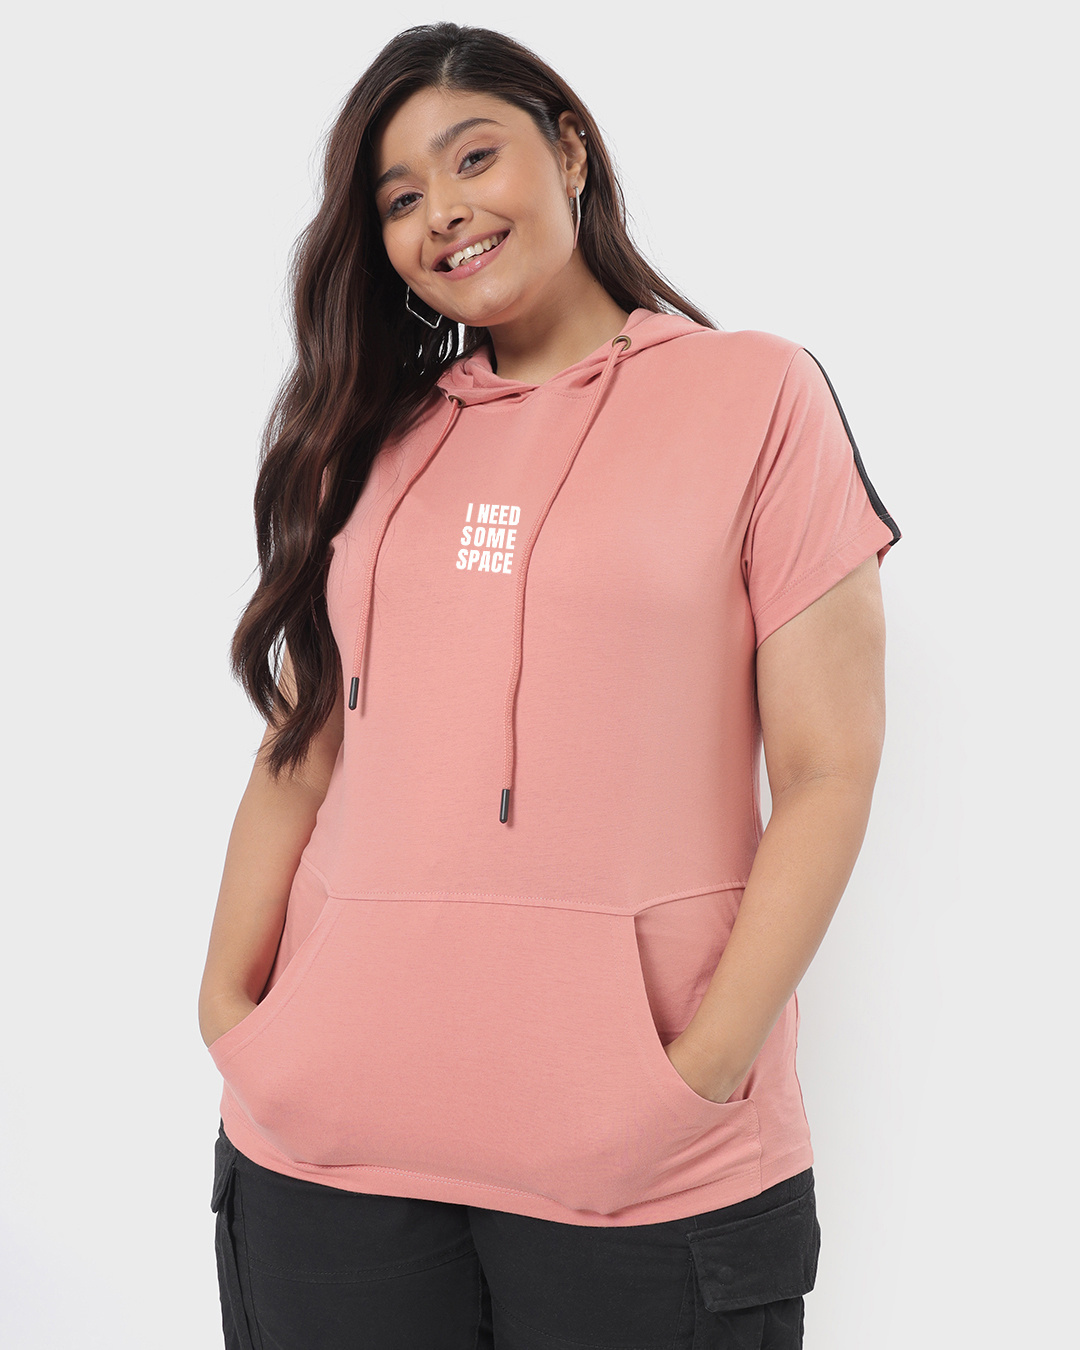 Shop Women's Pink I Need Some Space Teddy Graphic Printed Plus Size Hoodie T-shirt-Back